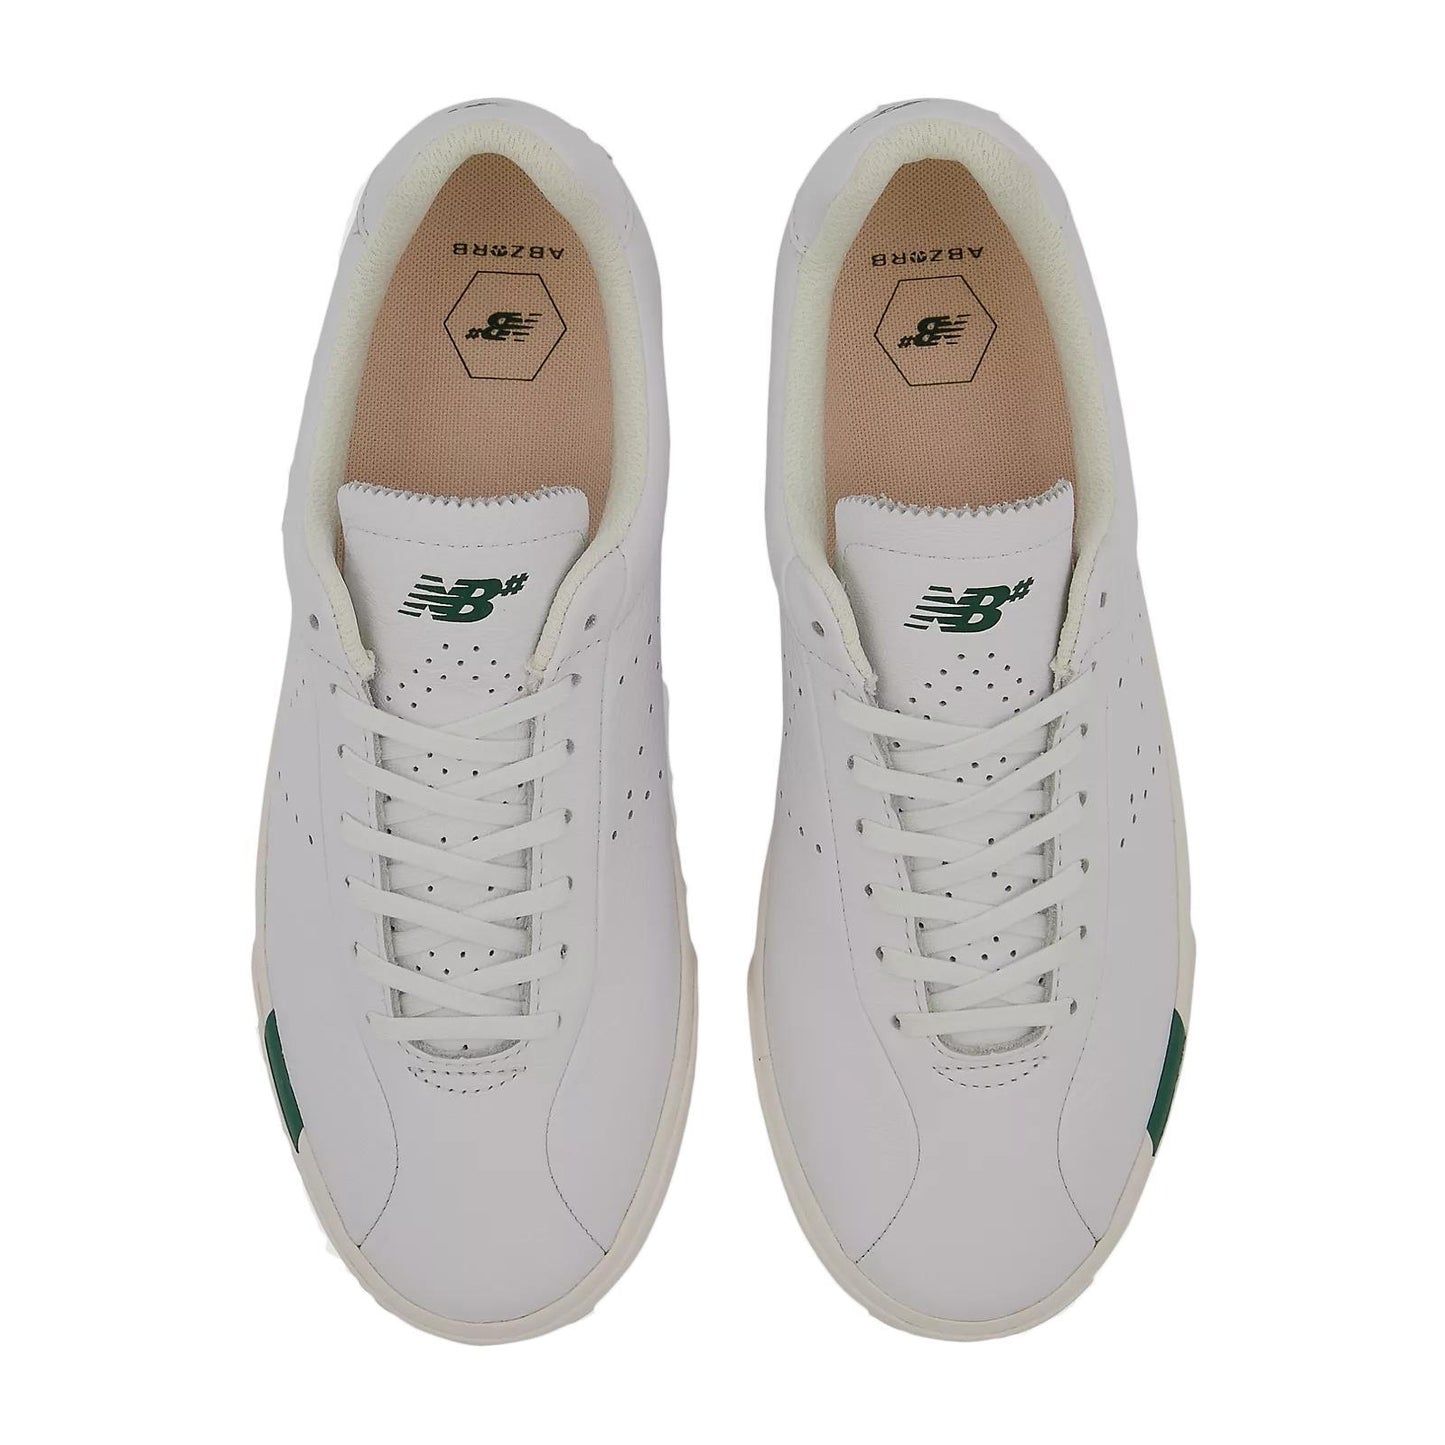 New Balance Numeric 22 Leather White Green Skate Shoes